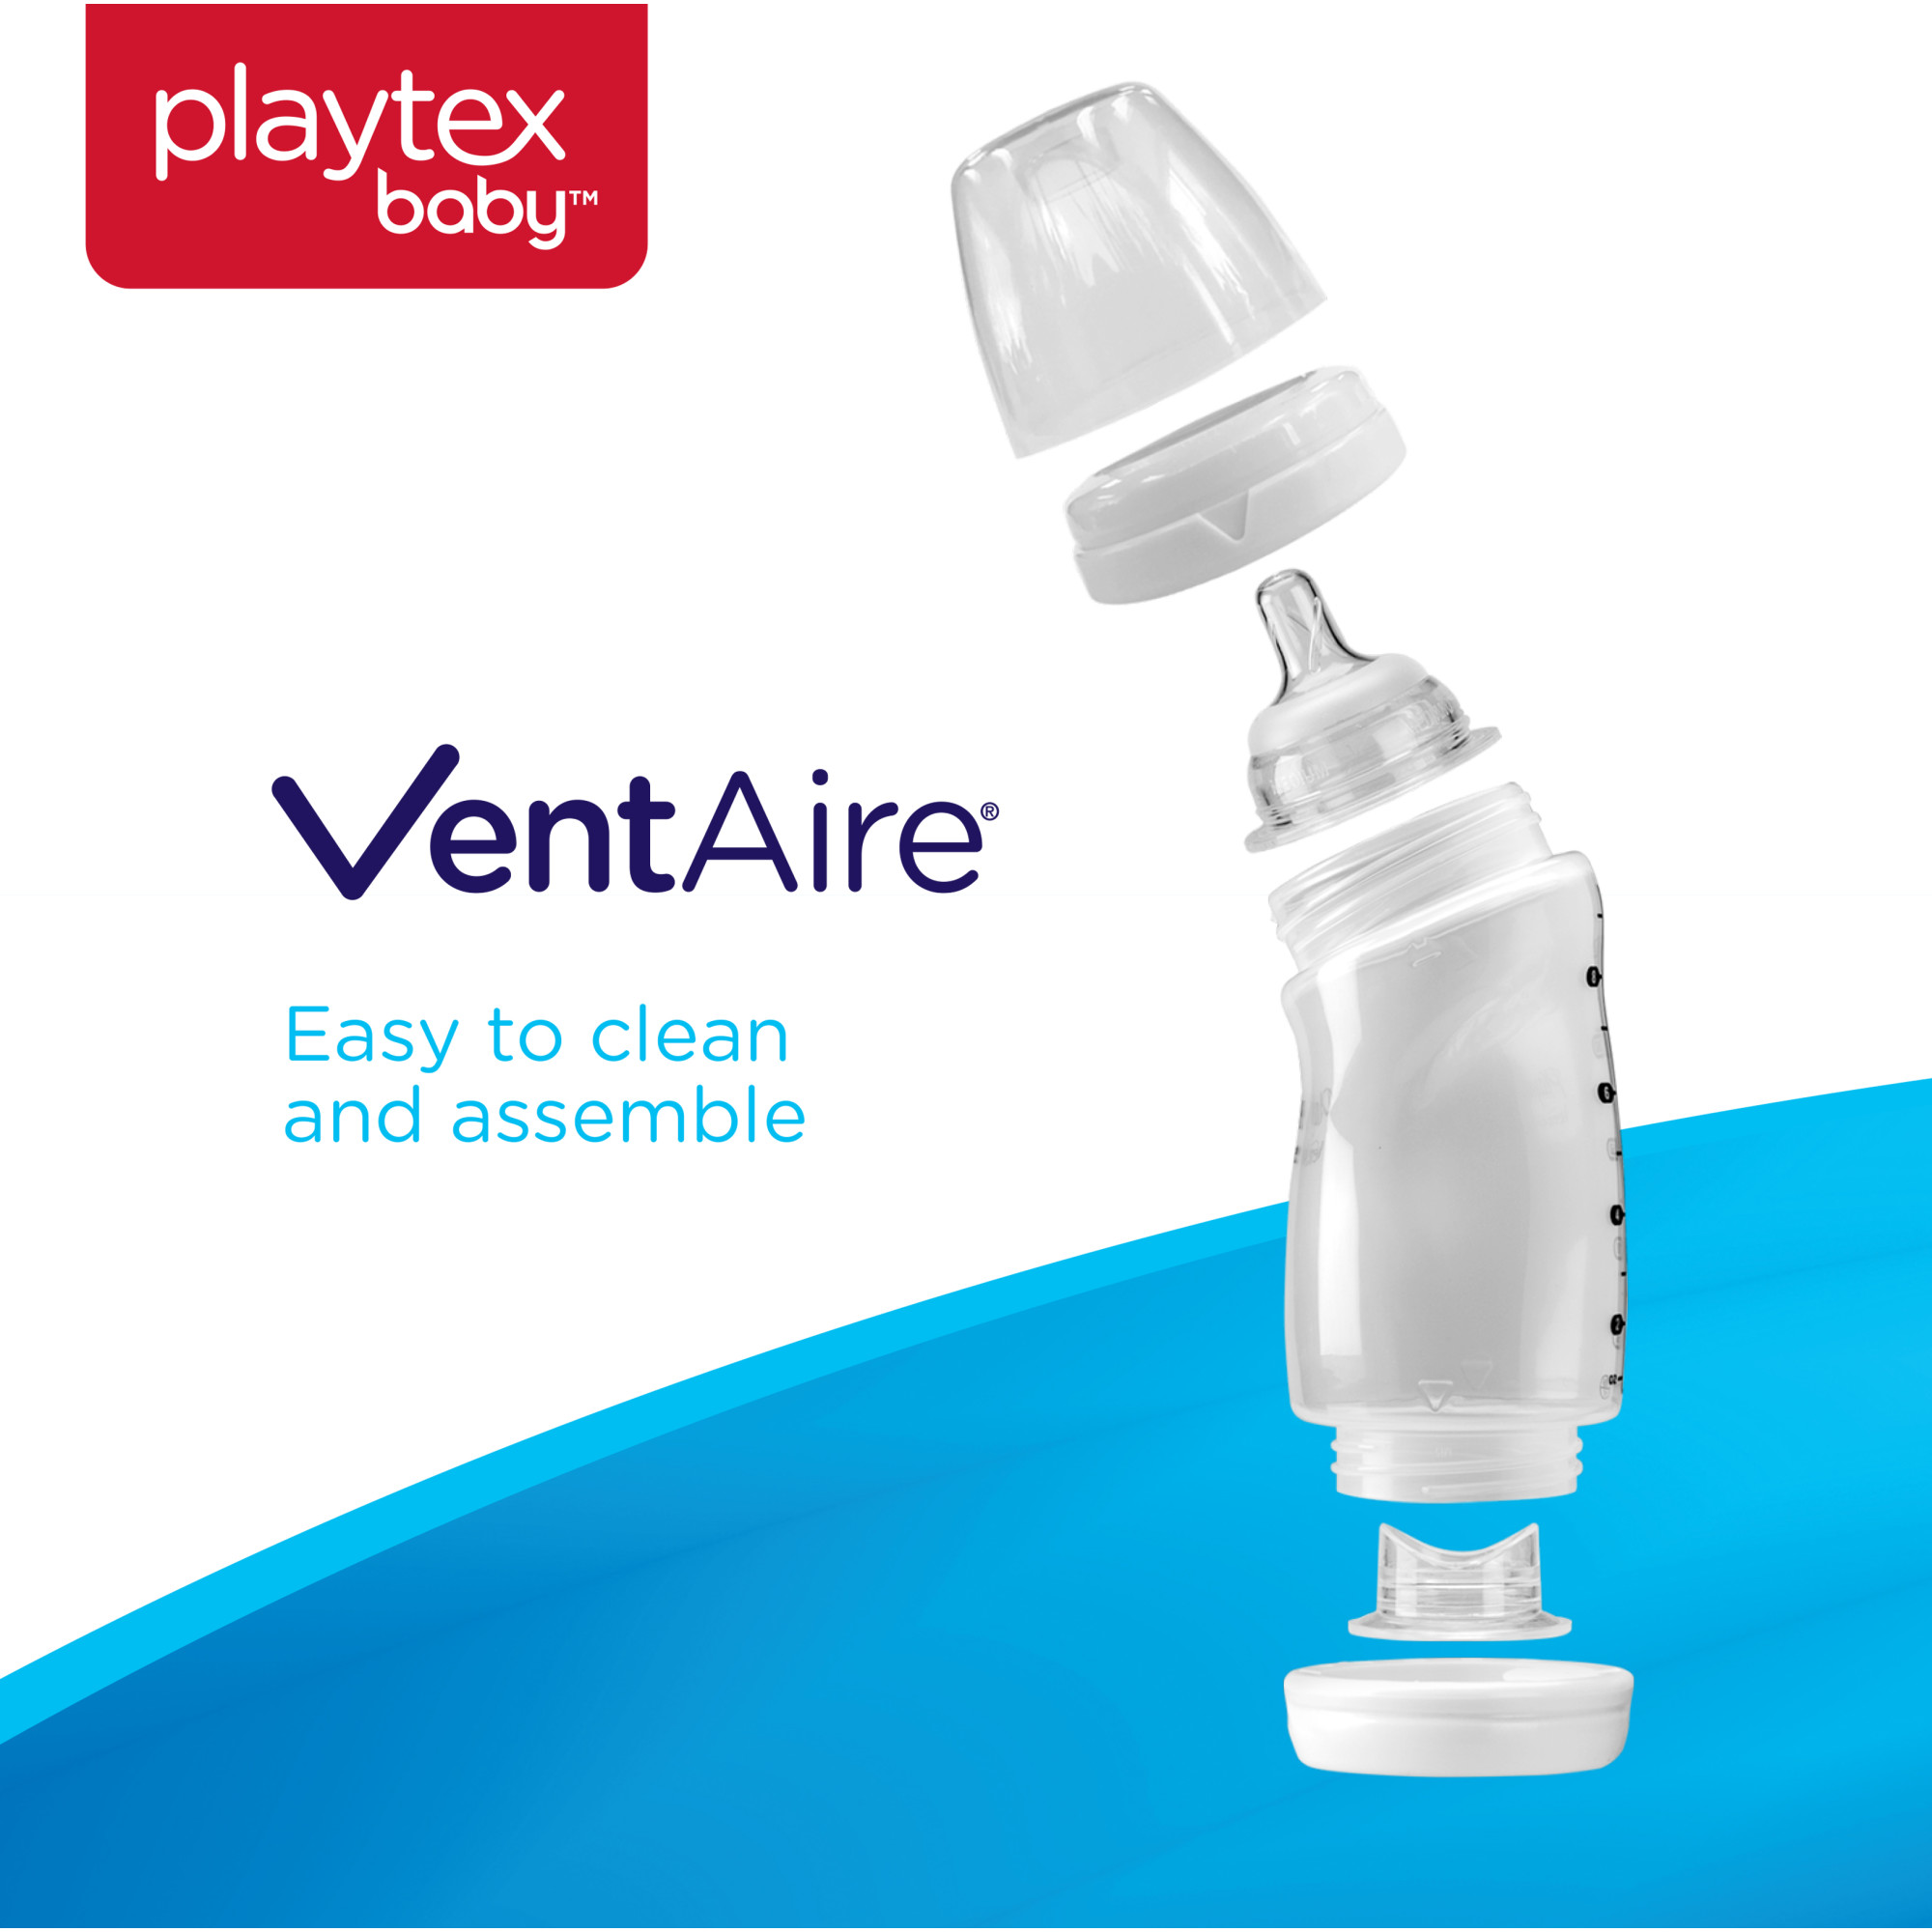 Playtex Baby VentAire Complete Tummy Comfort 6oz 3-Pack Baby Bottle - image 5 of 9